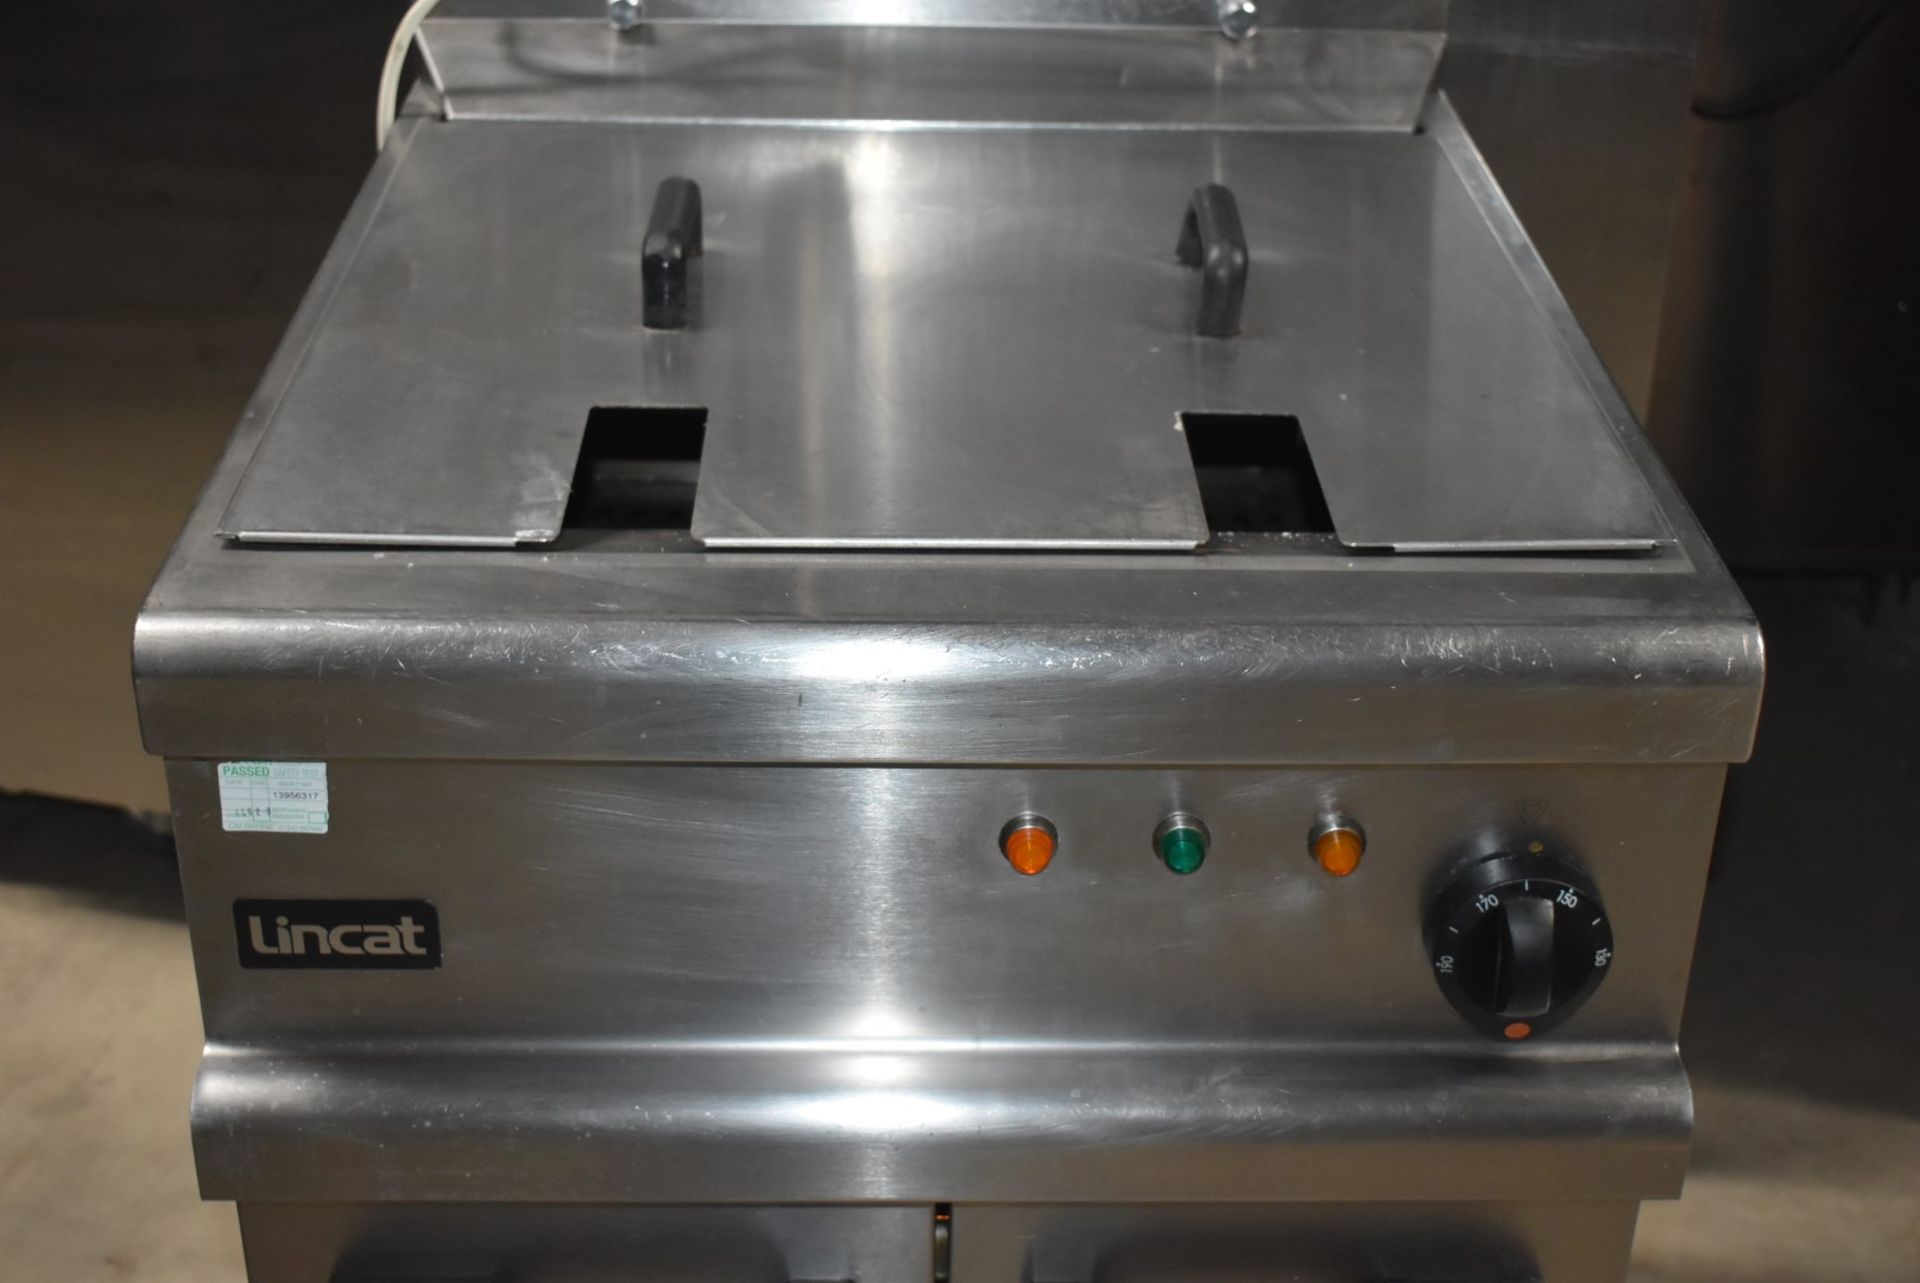 1 x Lincat Opus 700 Single Tank Electric Fryer With Built In Filtration - 3 Phase - Image 13 of 19